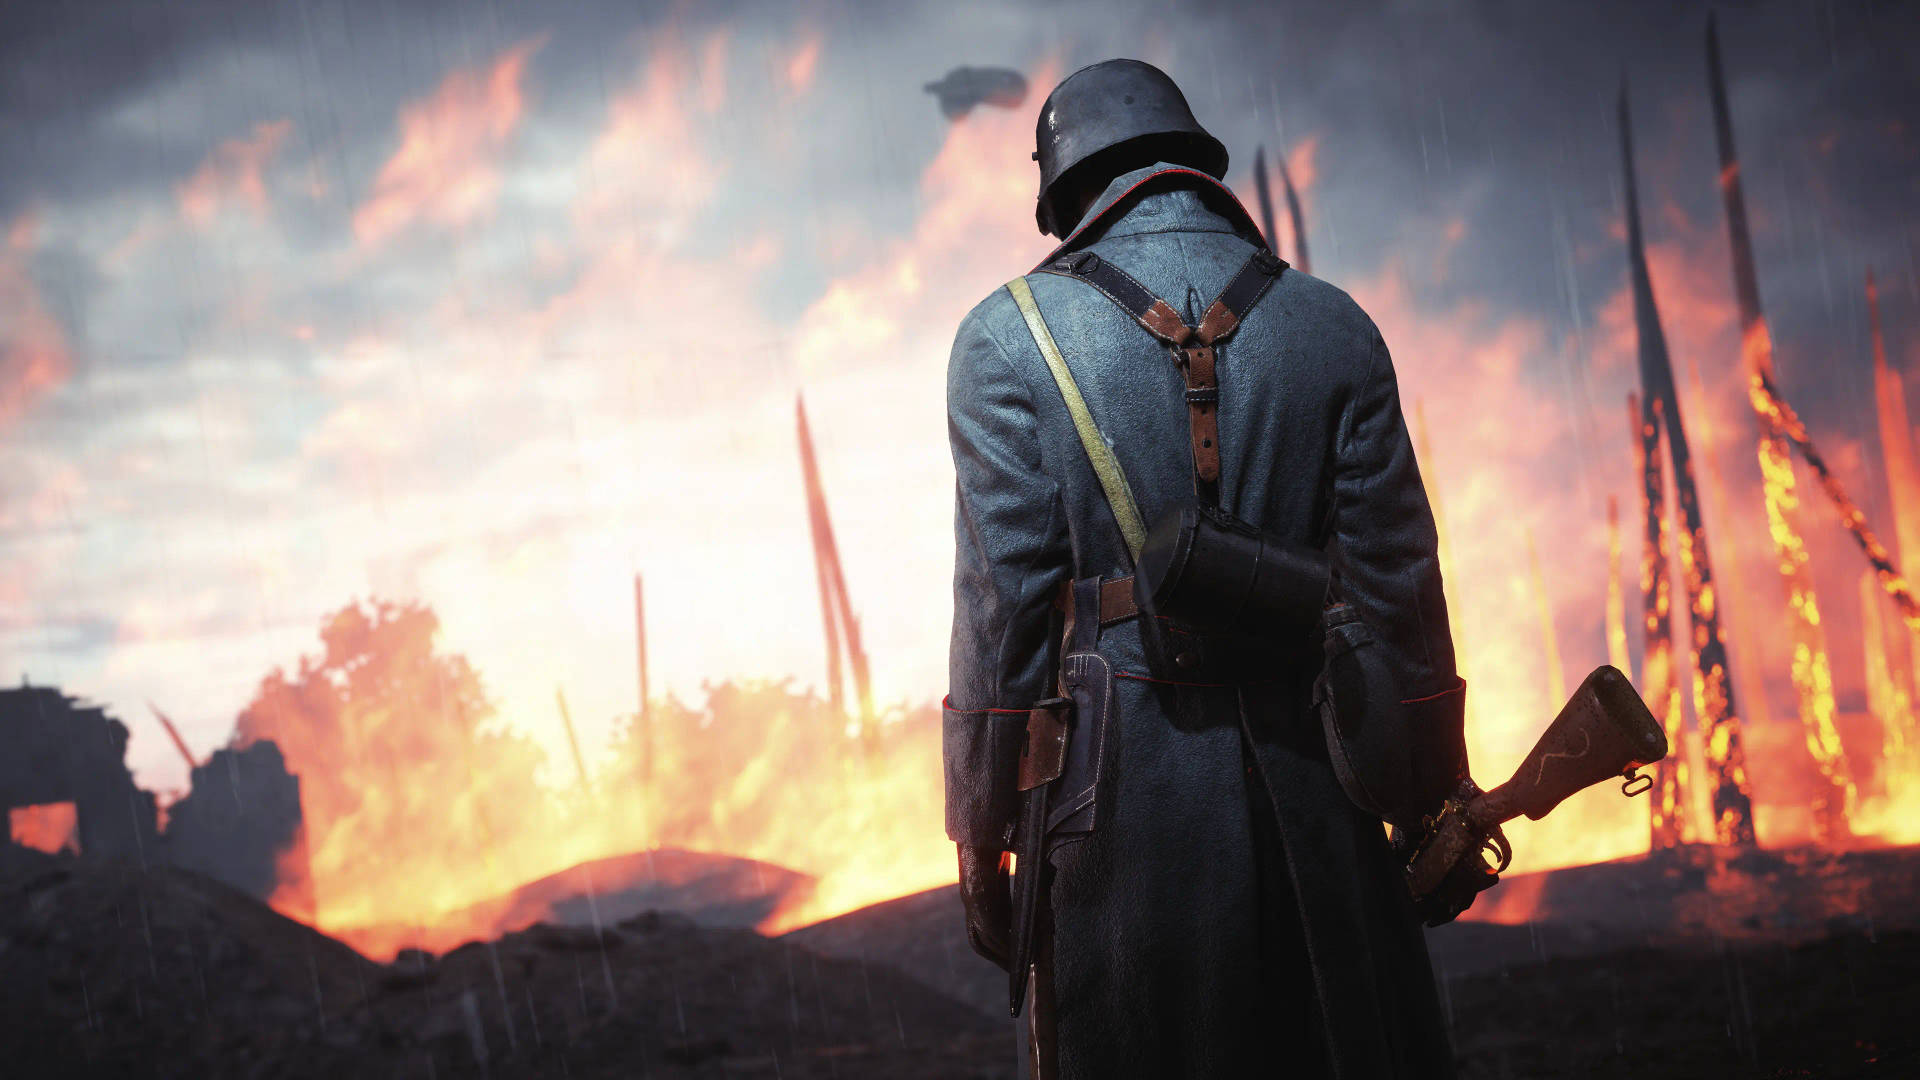 Stunning 4k Bf1 German Soldier Amid Burning Forest